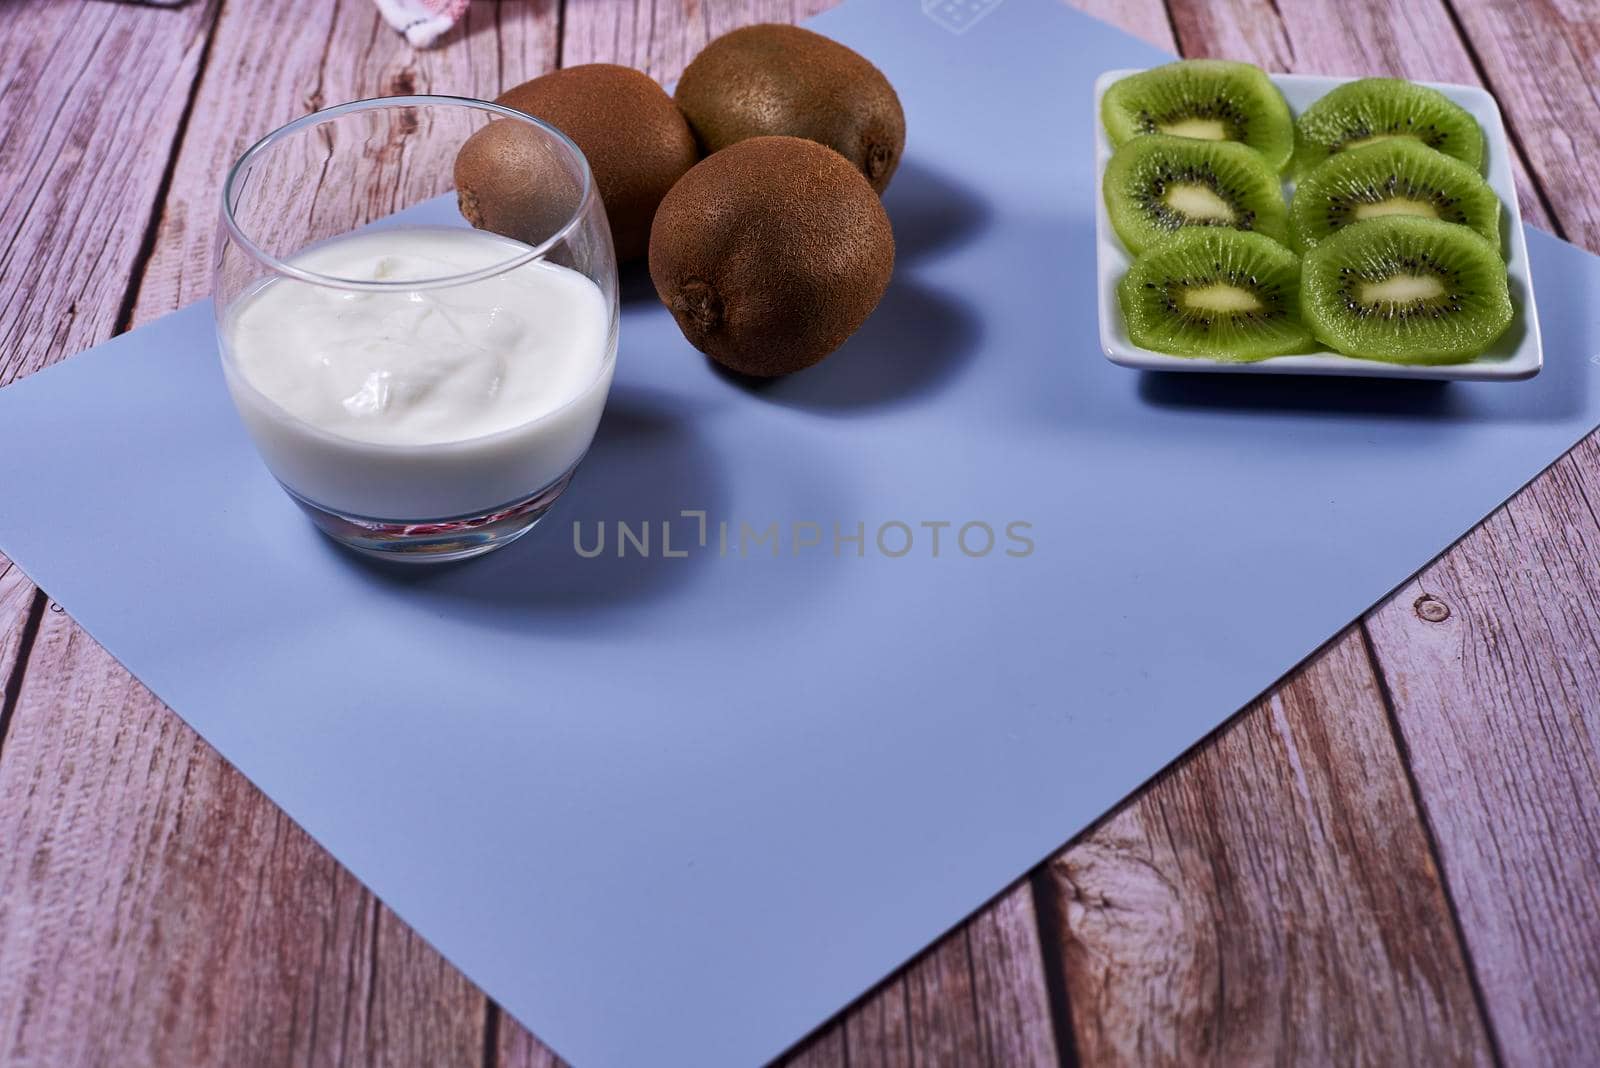 Glass of yoghurt with kiwis. Wooden floor, red and white kitchen towel, checkered, blue tablecloth.